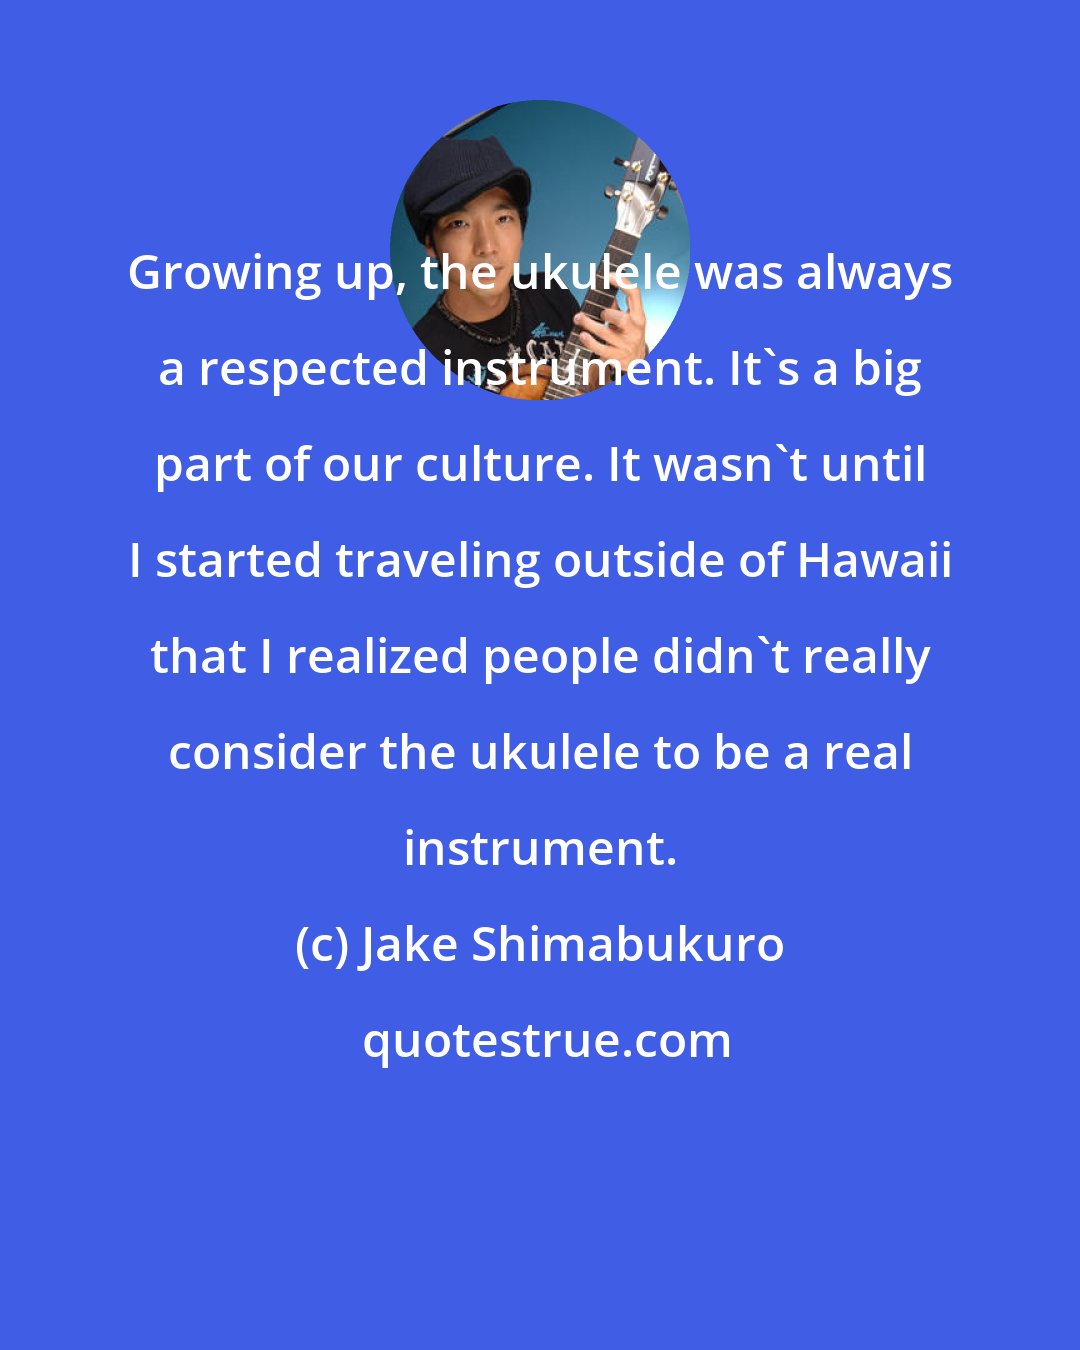 Jake Shimabukuro: Growing up, the ukulele was always a respected instrument. It's a big part of our culture. It wasn't until I started traveling outside of Hawaii that I realized people didn't really consider the ukulele to be a real instrument.